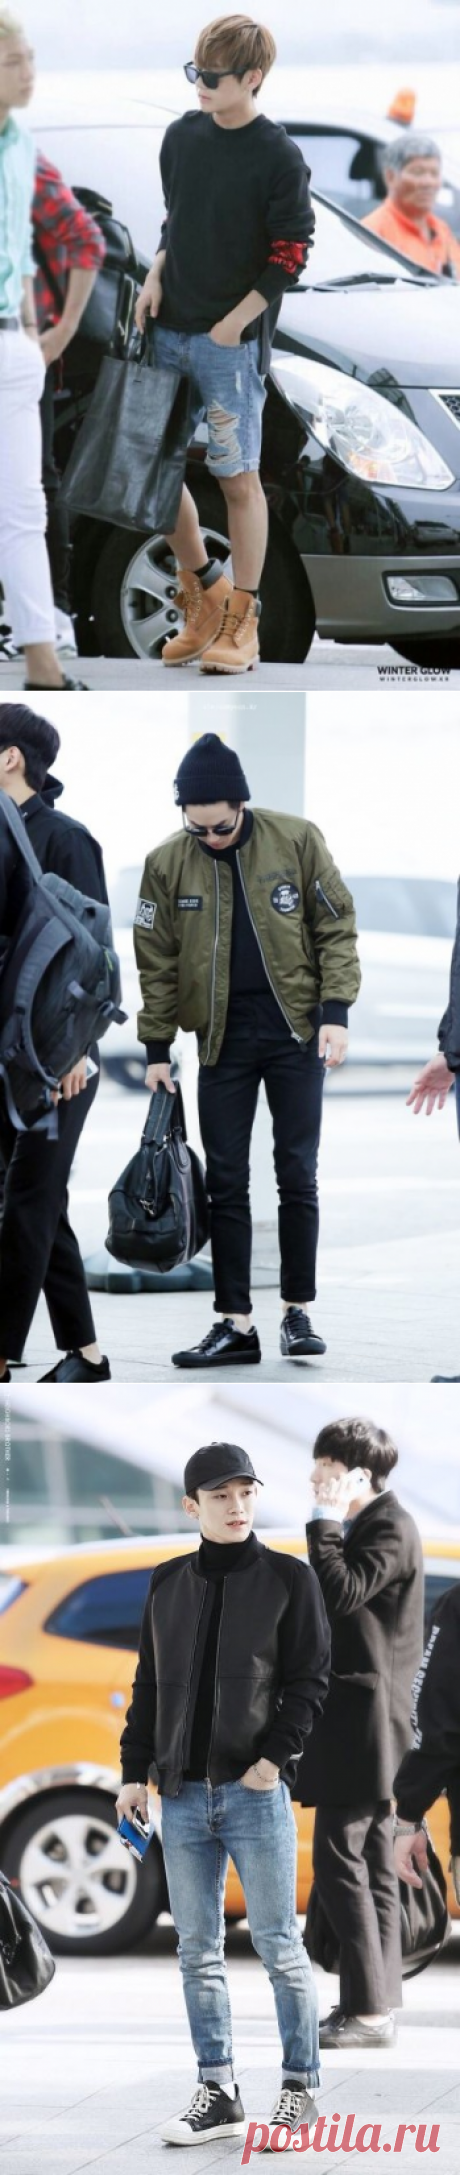 Boys Outfit Ideas from K-Pop Airport Fashion Style &amp;ndash; Ferbena.com